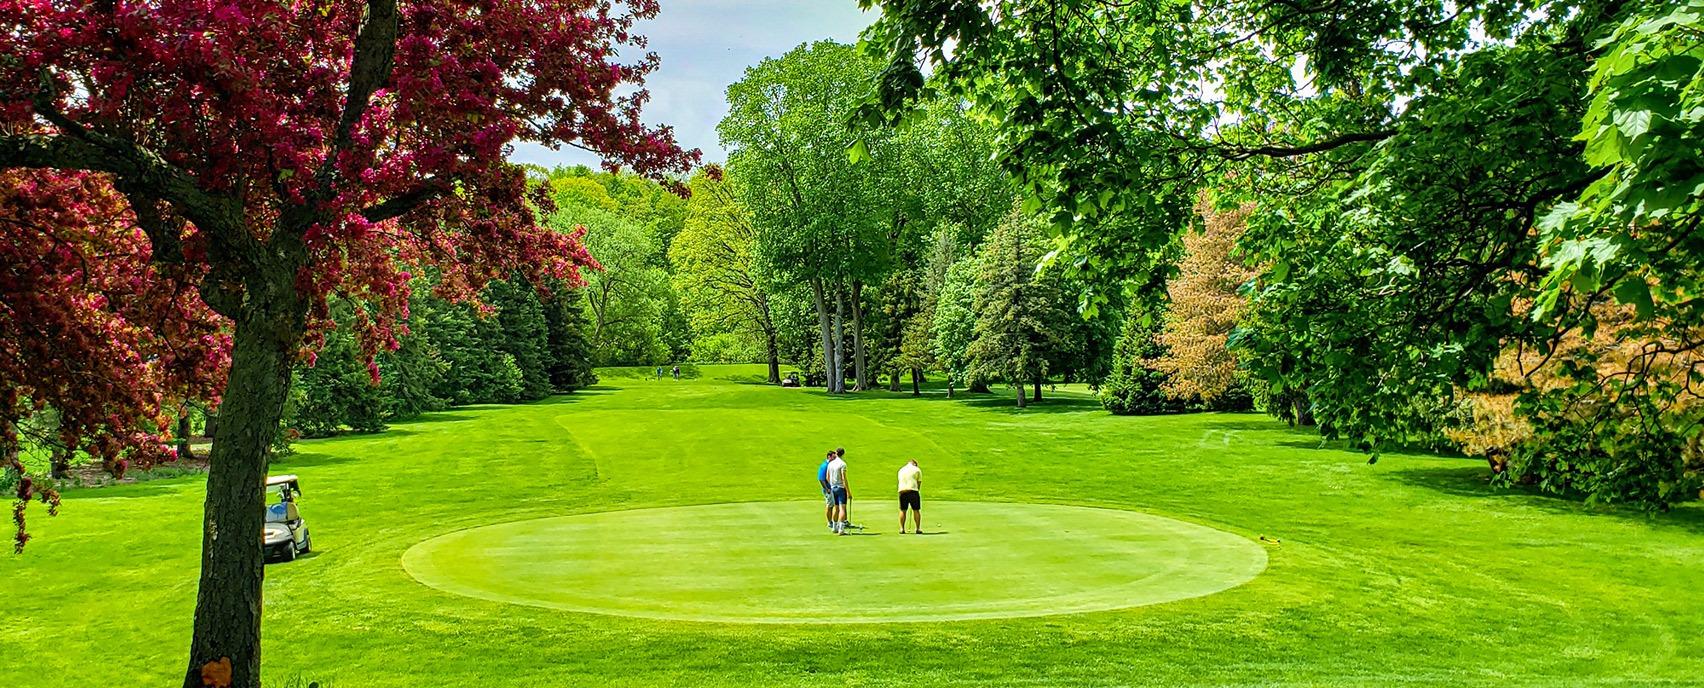 A group of people golfing at East Park located in London, Ontario